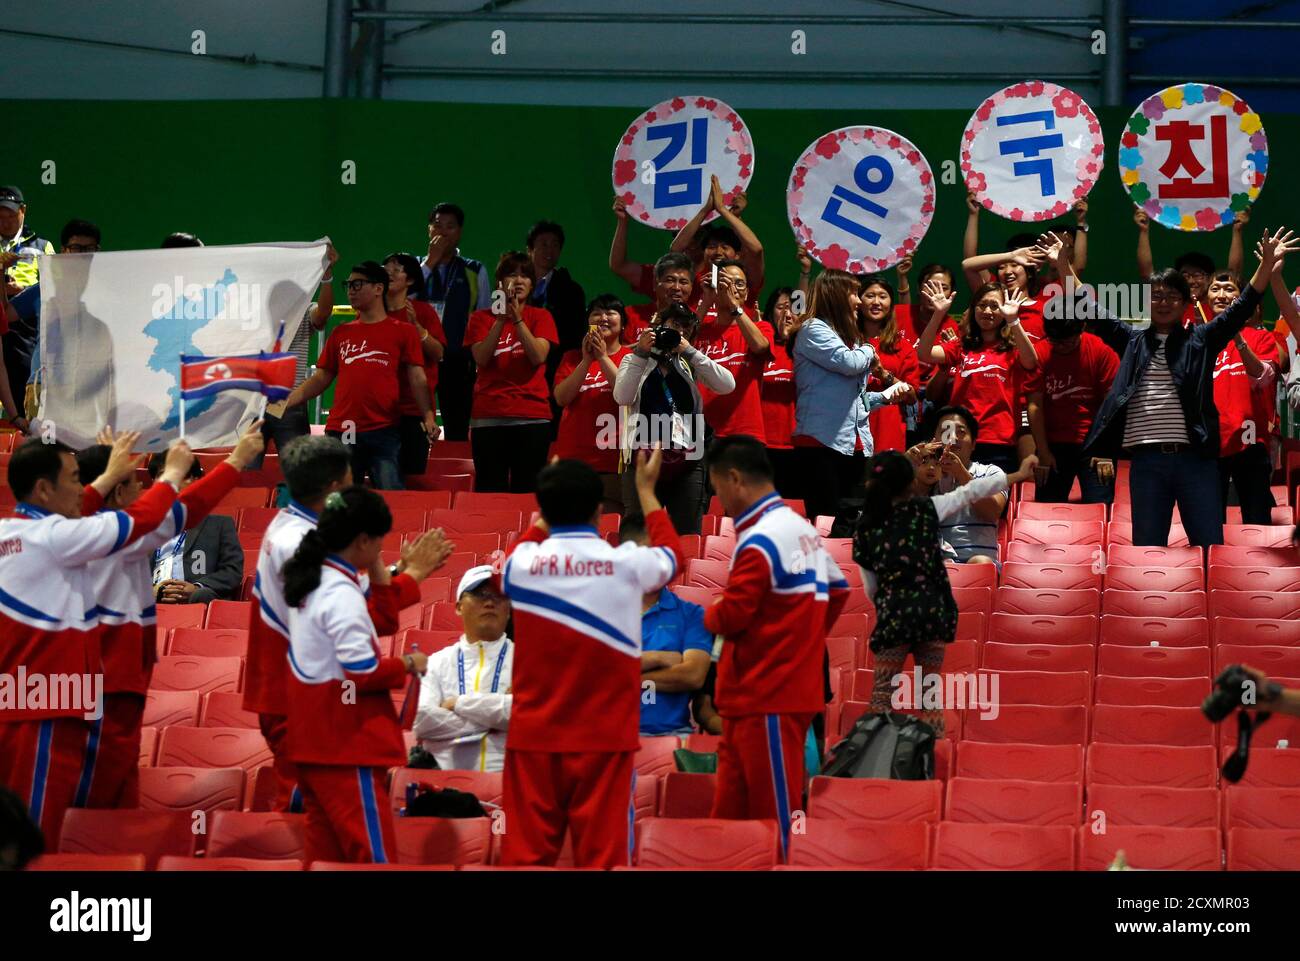 North Korean (bottom) and South Korean spectators, the latter holding a map of North and South Korea as one land mass, sing songs and wave flags at each other after North Korea's Kim Un Guk broke his second world record of the night and won a gold medal for the men's 62kg weightlifting competition at the Moonlight Garden Venue during the 17th Asian Games in Incheon September 21, 2014. Kim became the second North Korean weightlifter in two days to break world records at the Asian Games, lifting 154kg in the snatch component of the men's 62kg category on Sunday before setting a new mark for his  Stock Photo